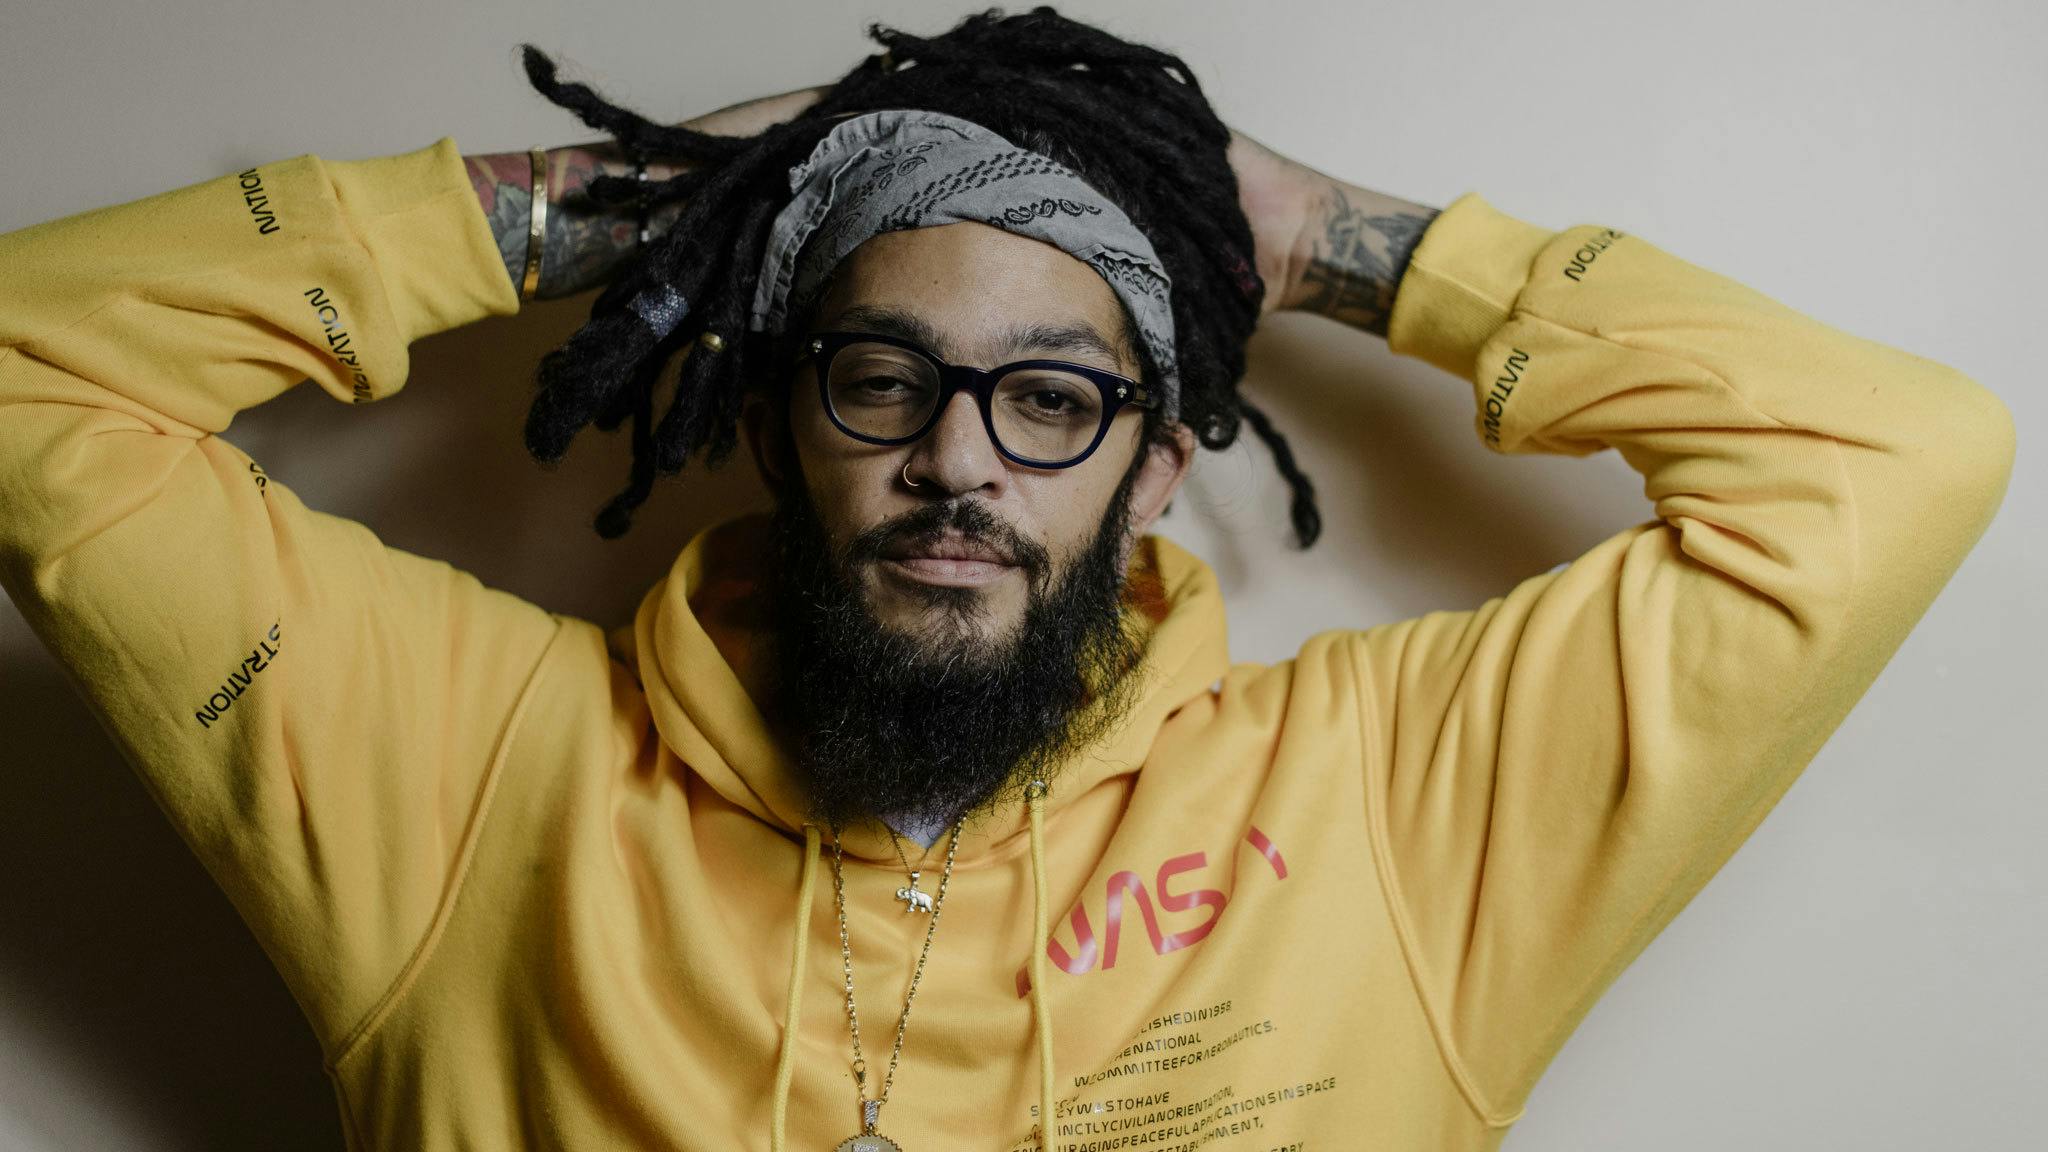 Travie McCoy: “I ran through the flames and stomped them out so others could walk through easily”